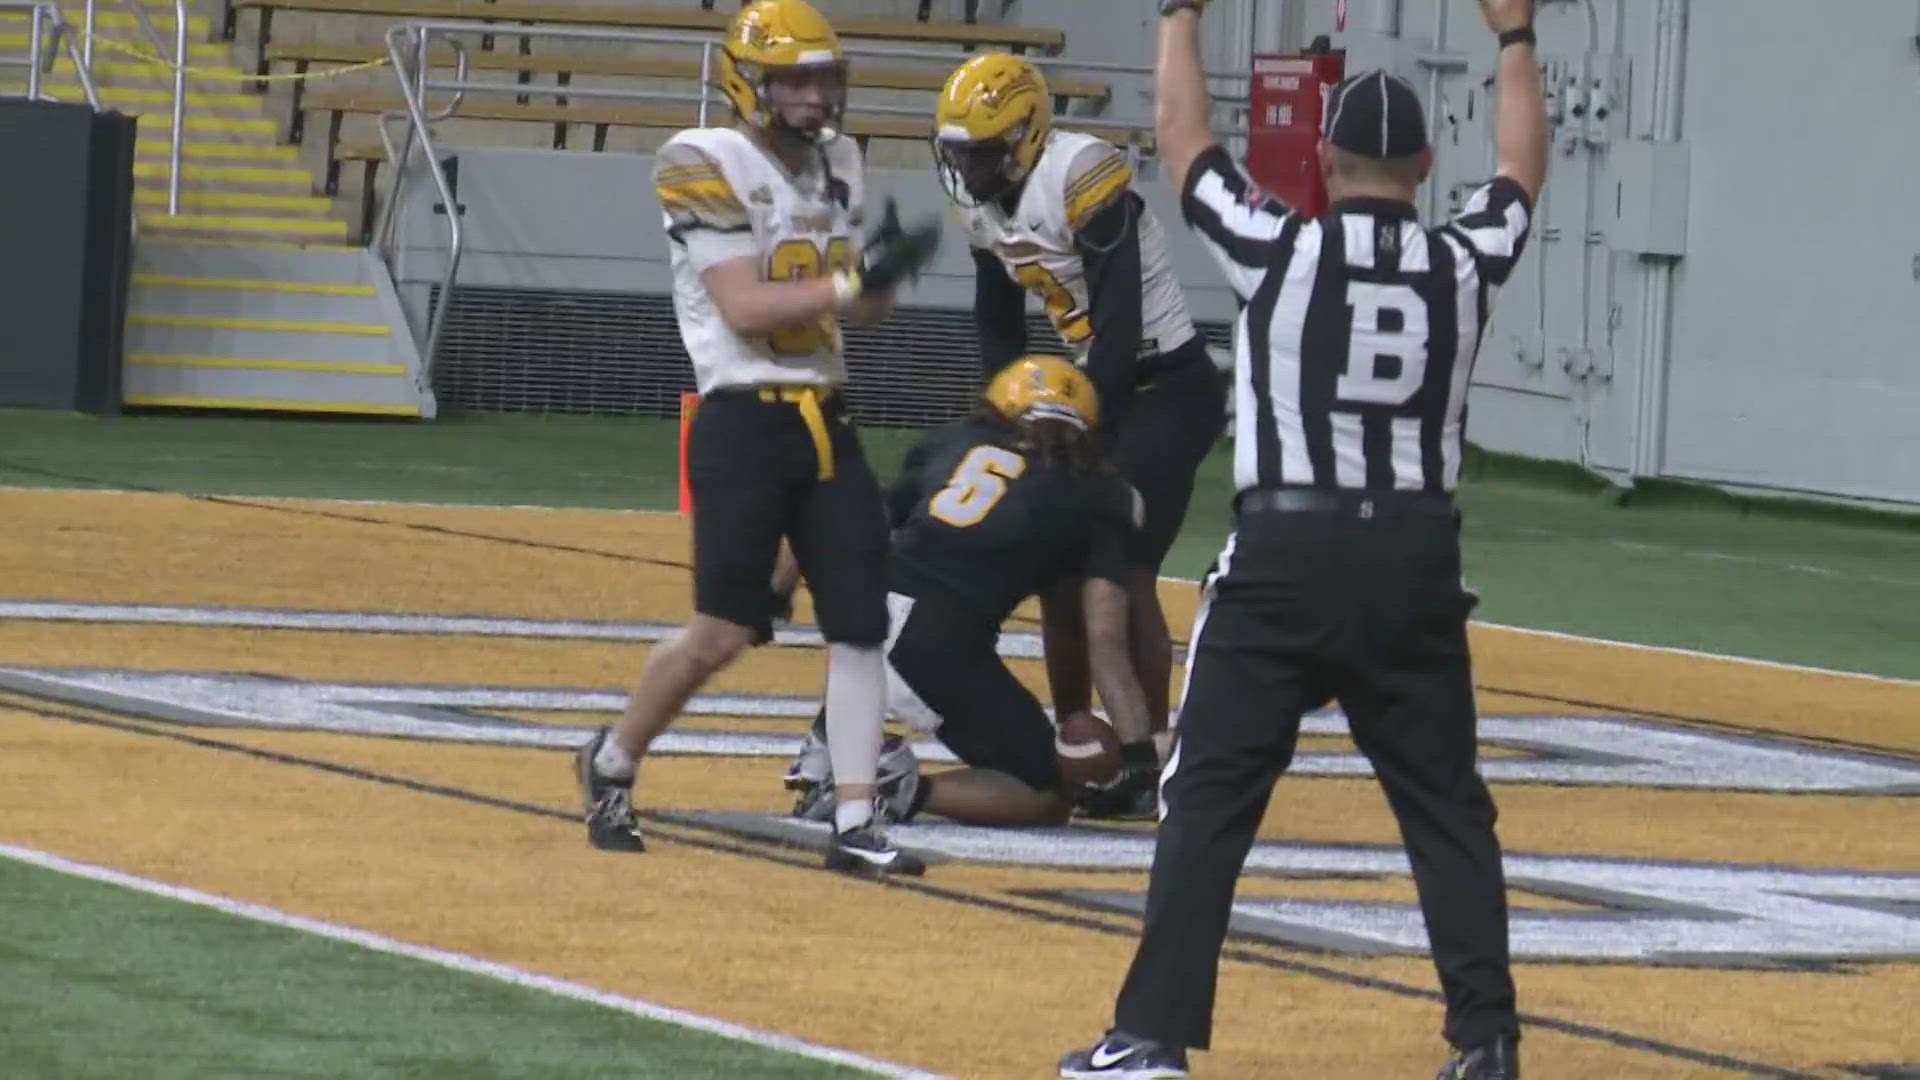 The black team led by quarterback Jack Layne took home the win in Idaho's spring game.